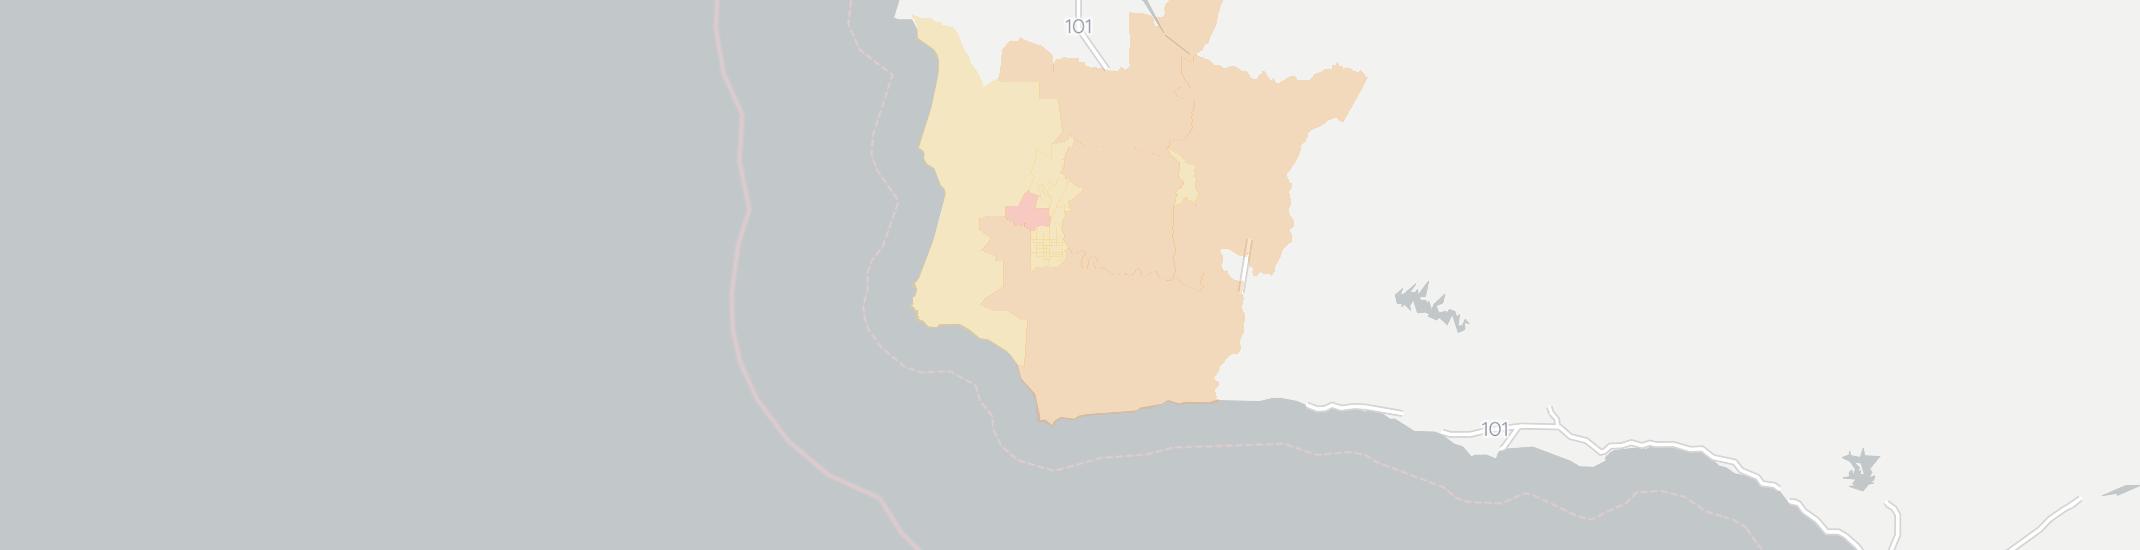 Lompoc Internet Competition Map. Click for interactive map.